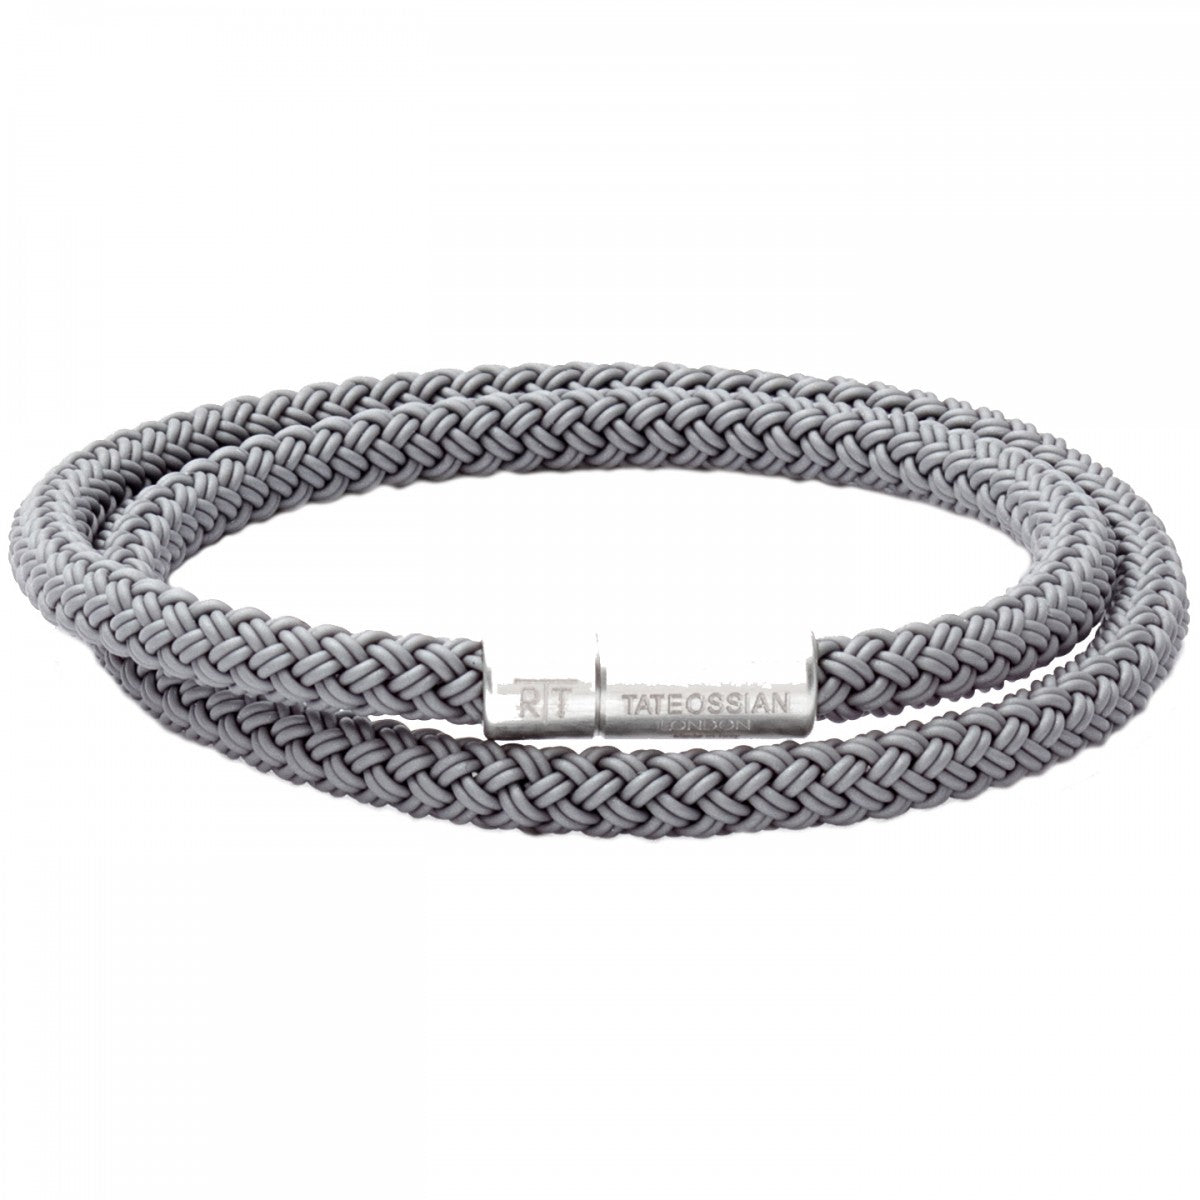 Tateossian RT Silver Braided Bracelet, Rubber Cable, Anodized Aluminum Clasp, Double Wrap